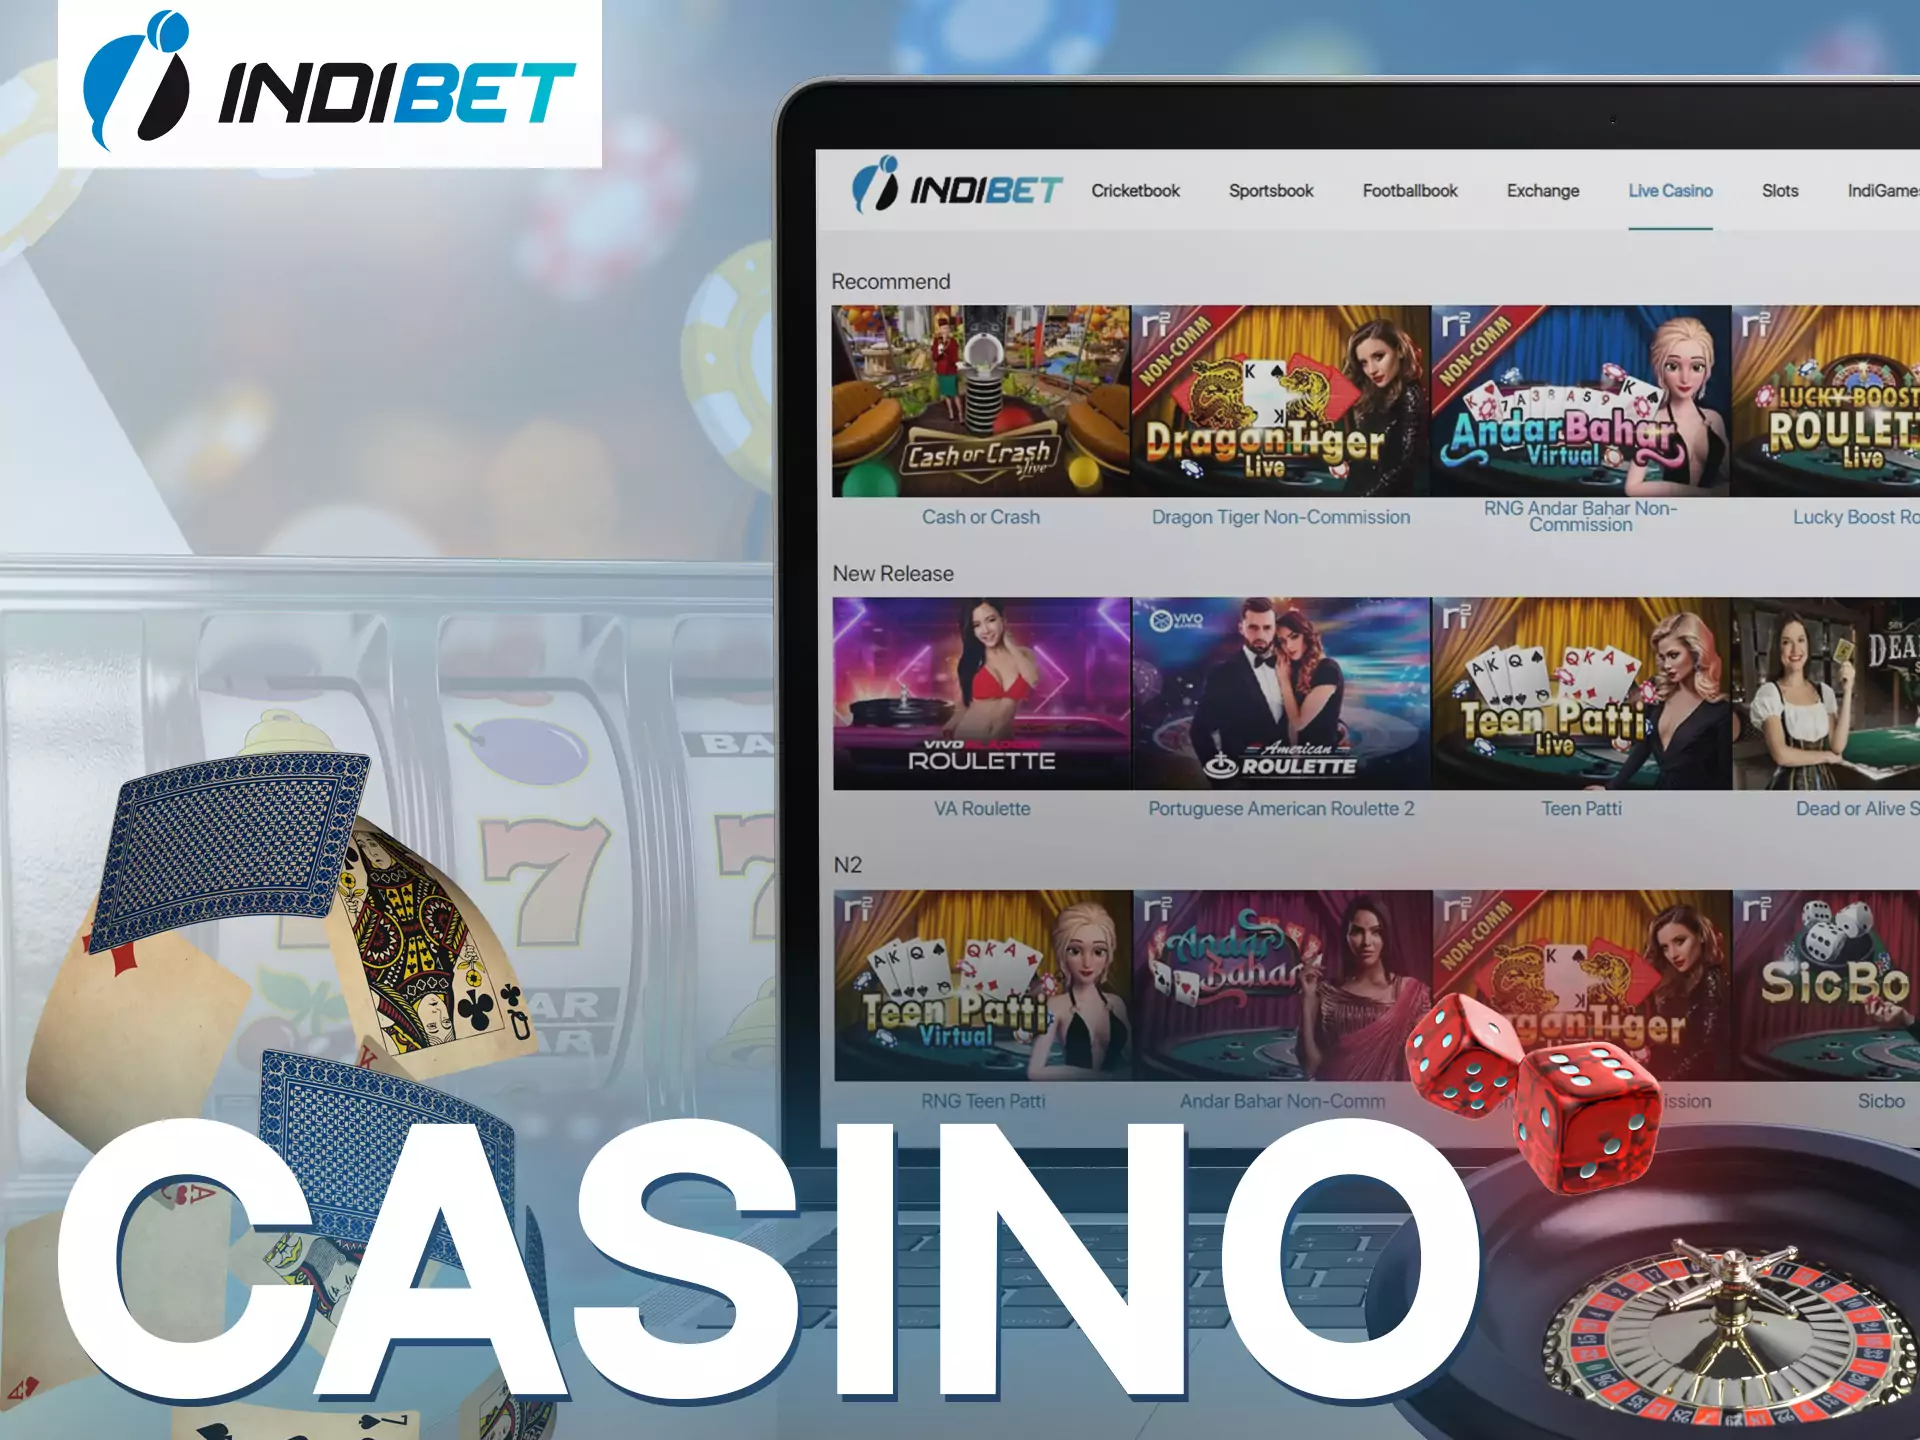 Play exciting games at Indibet Casino.